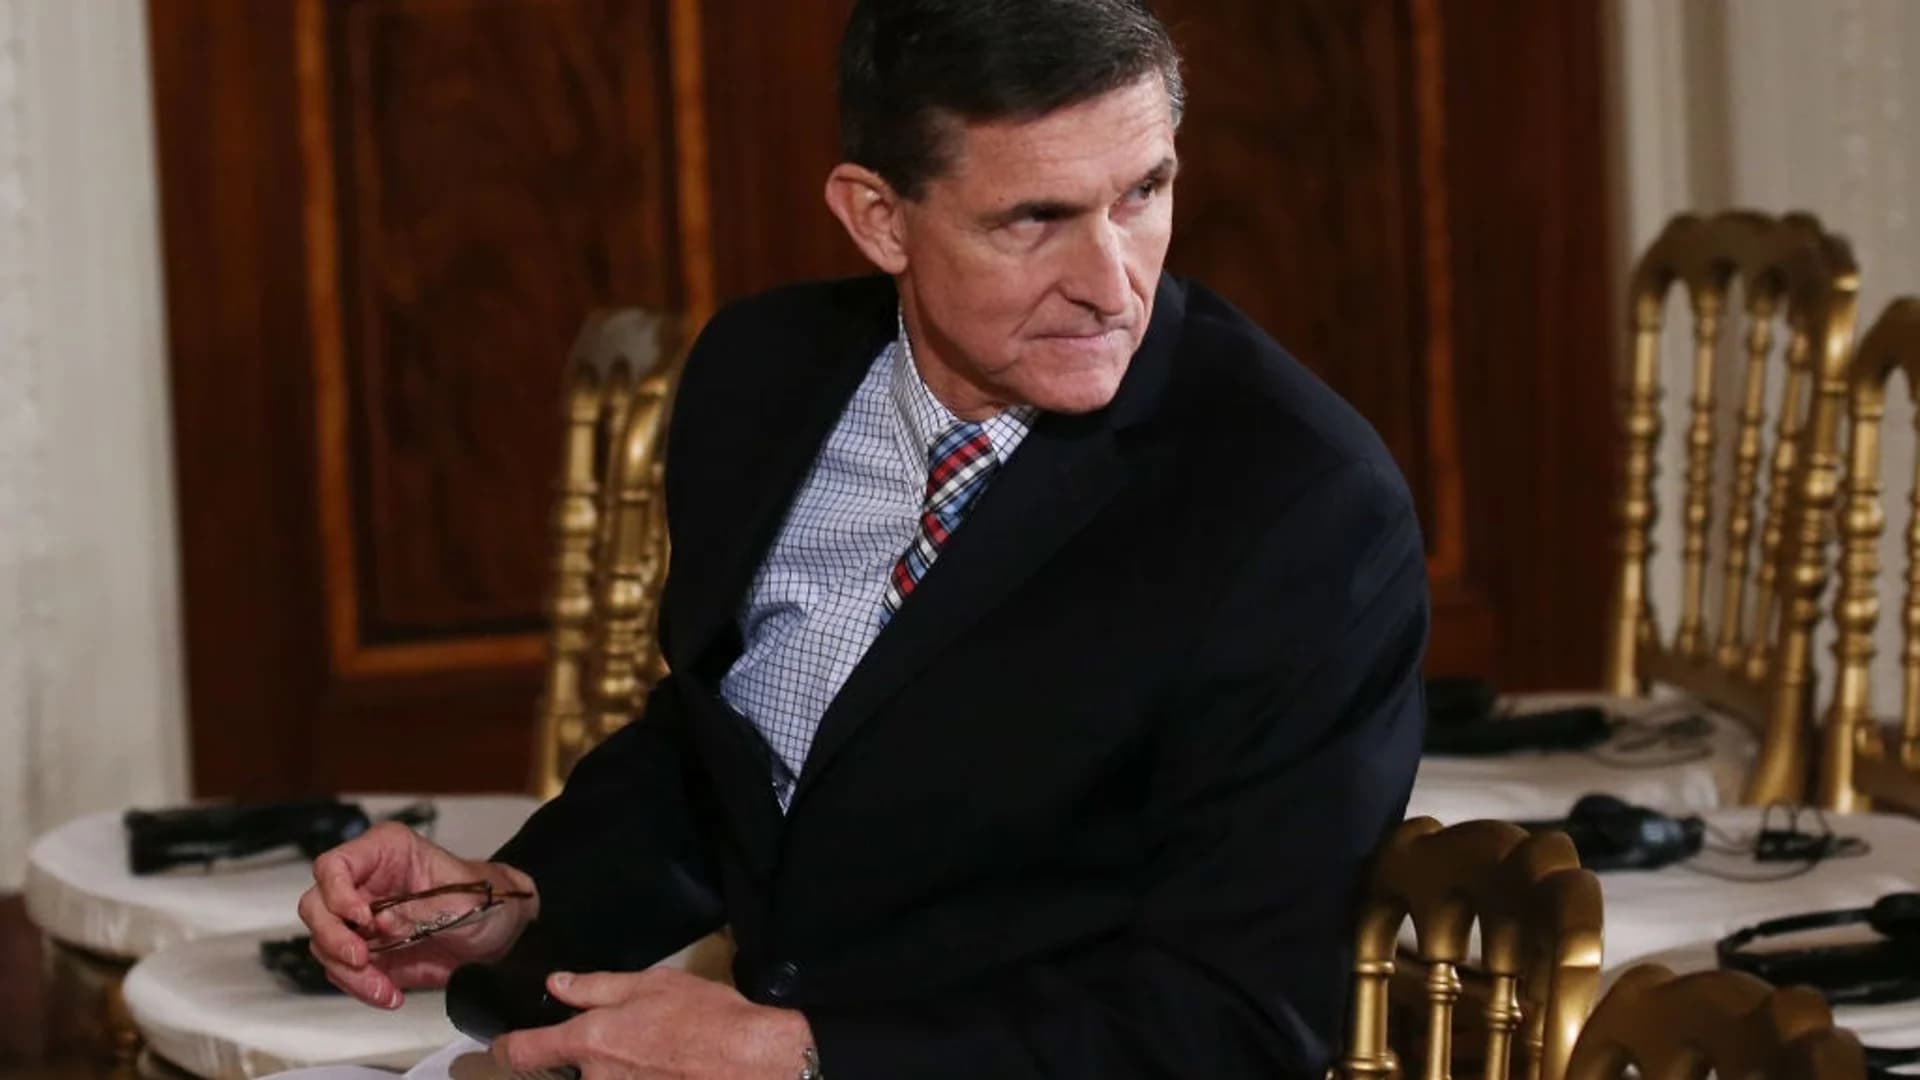 Mueller recommends no prison for Flynn, citing cooperation